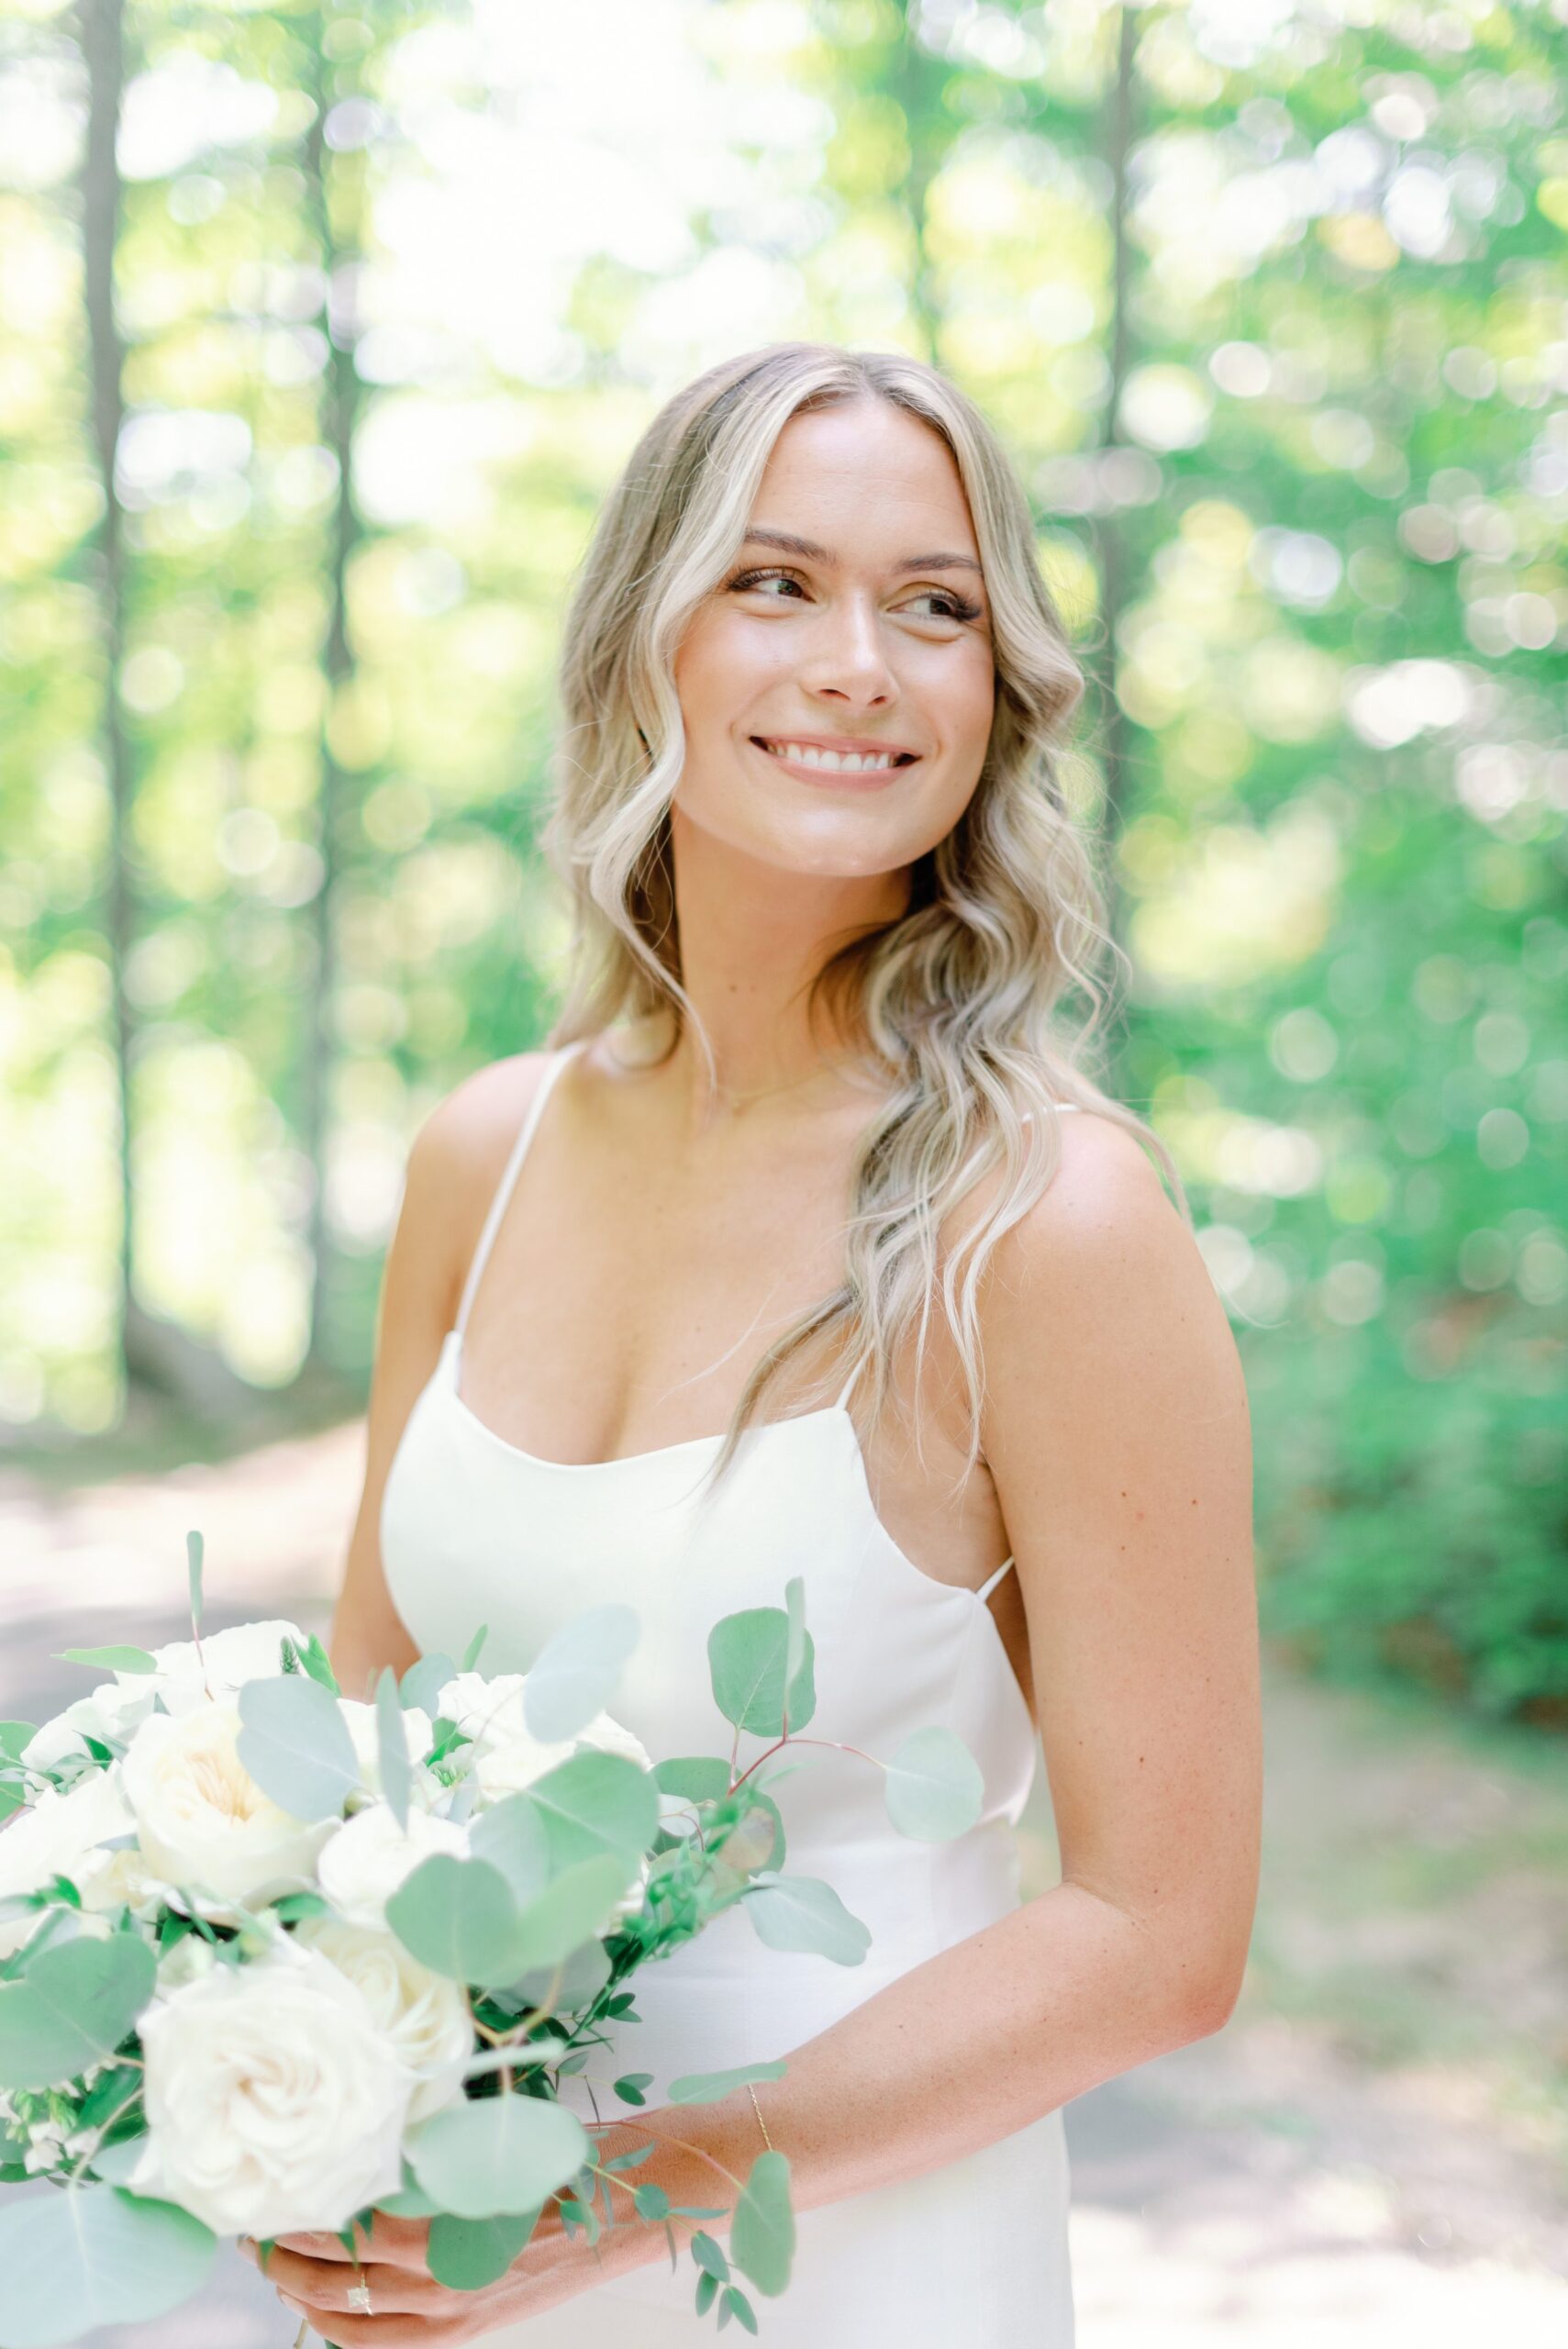 Outdoor bridal portrait. Light and airy wedding photography.